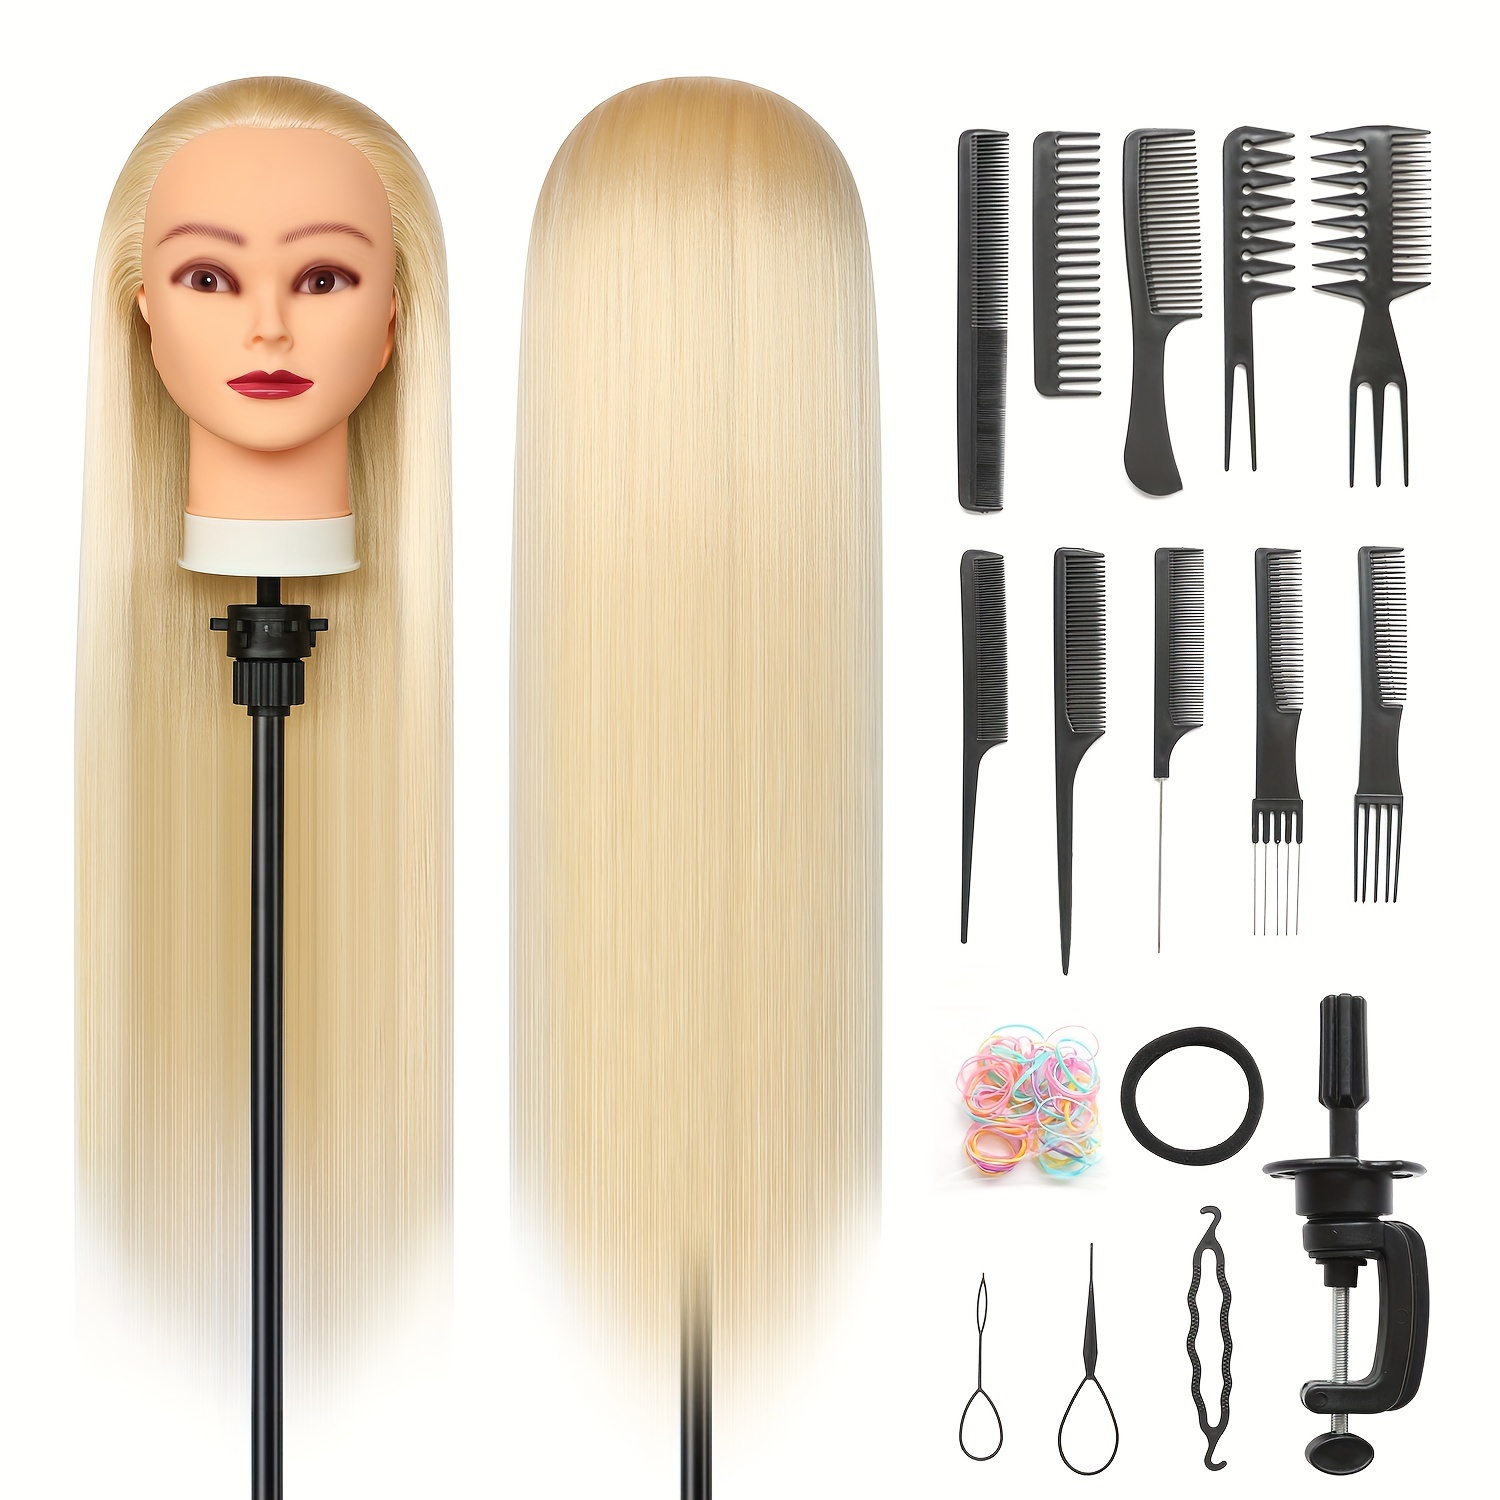  Mannequin Head with Hair,Hairdresser Training Head,Long Hair  Cosmetology Doll Head,Hair Styling Practice Head for Braiding (Beige) :  Beauty & Personal Care